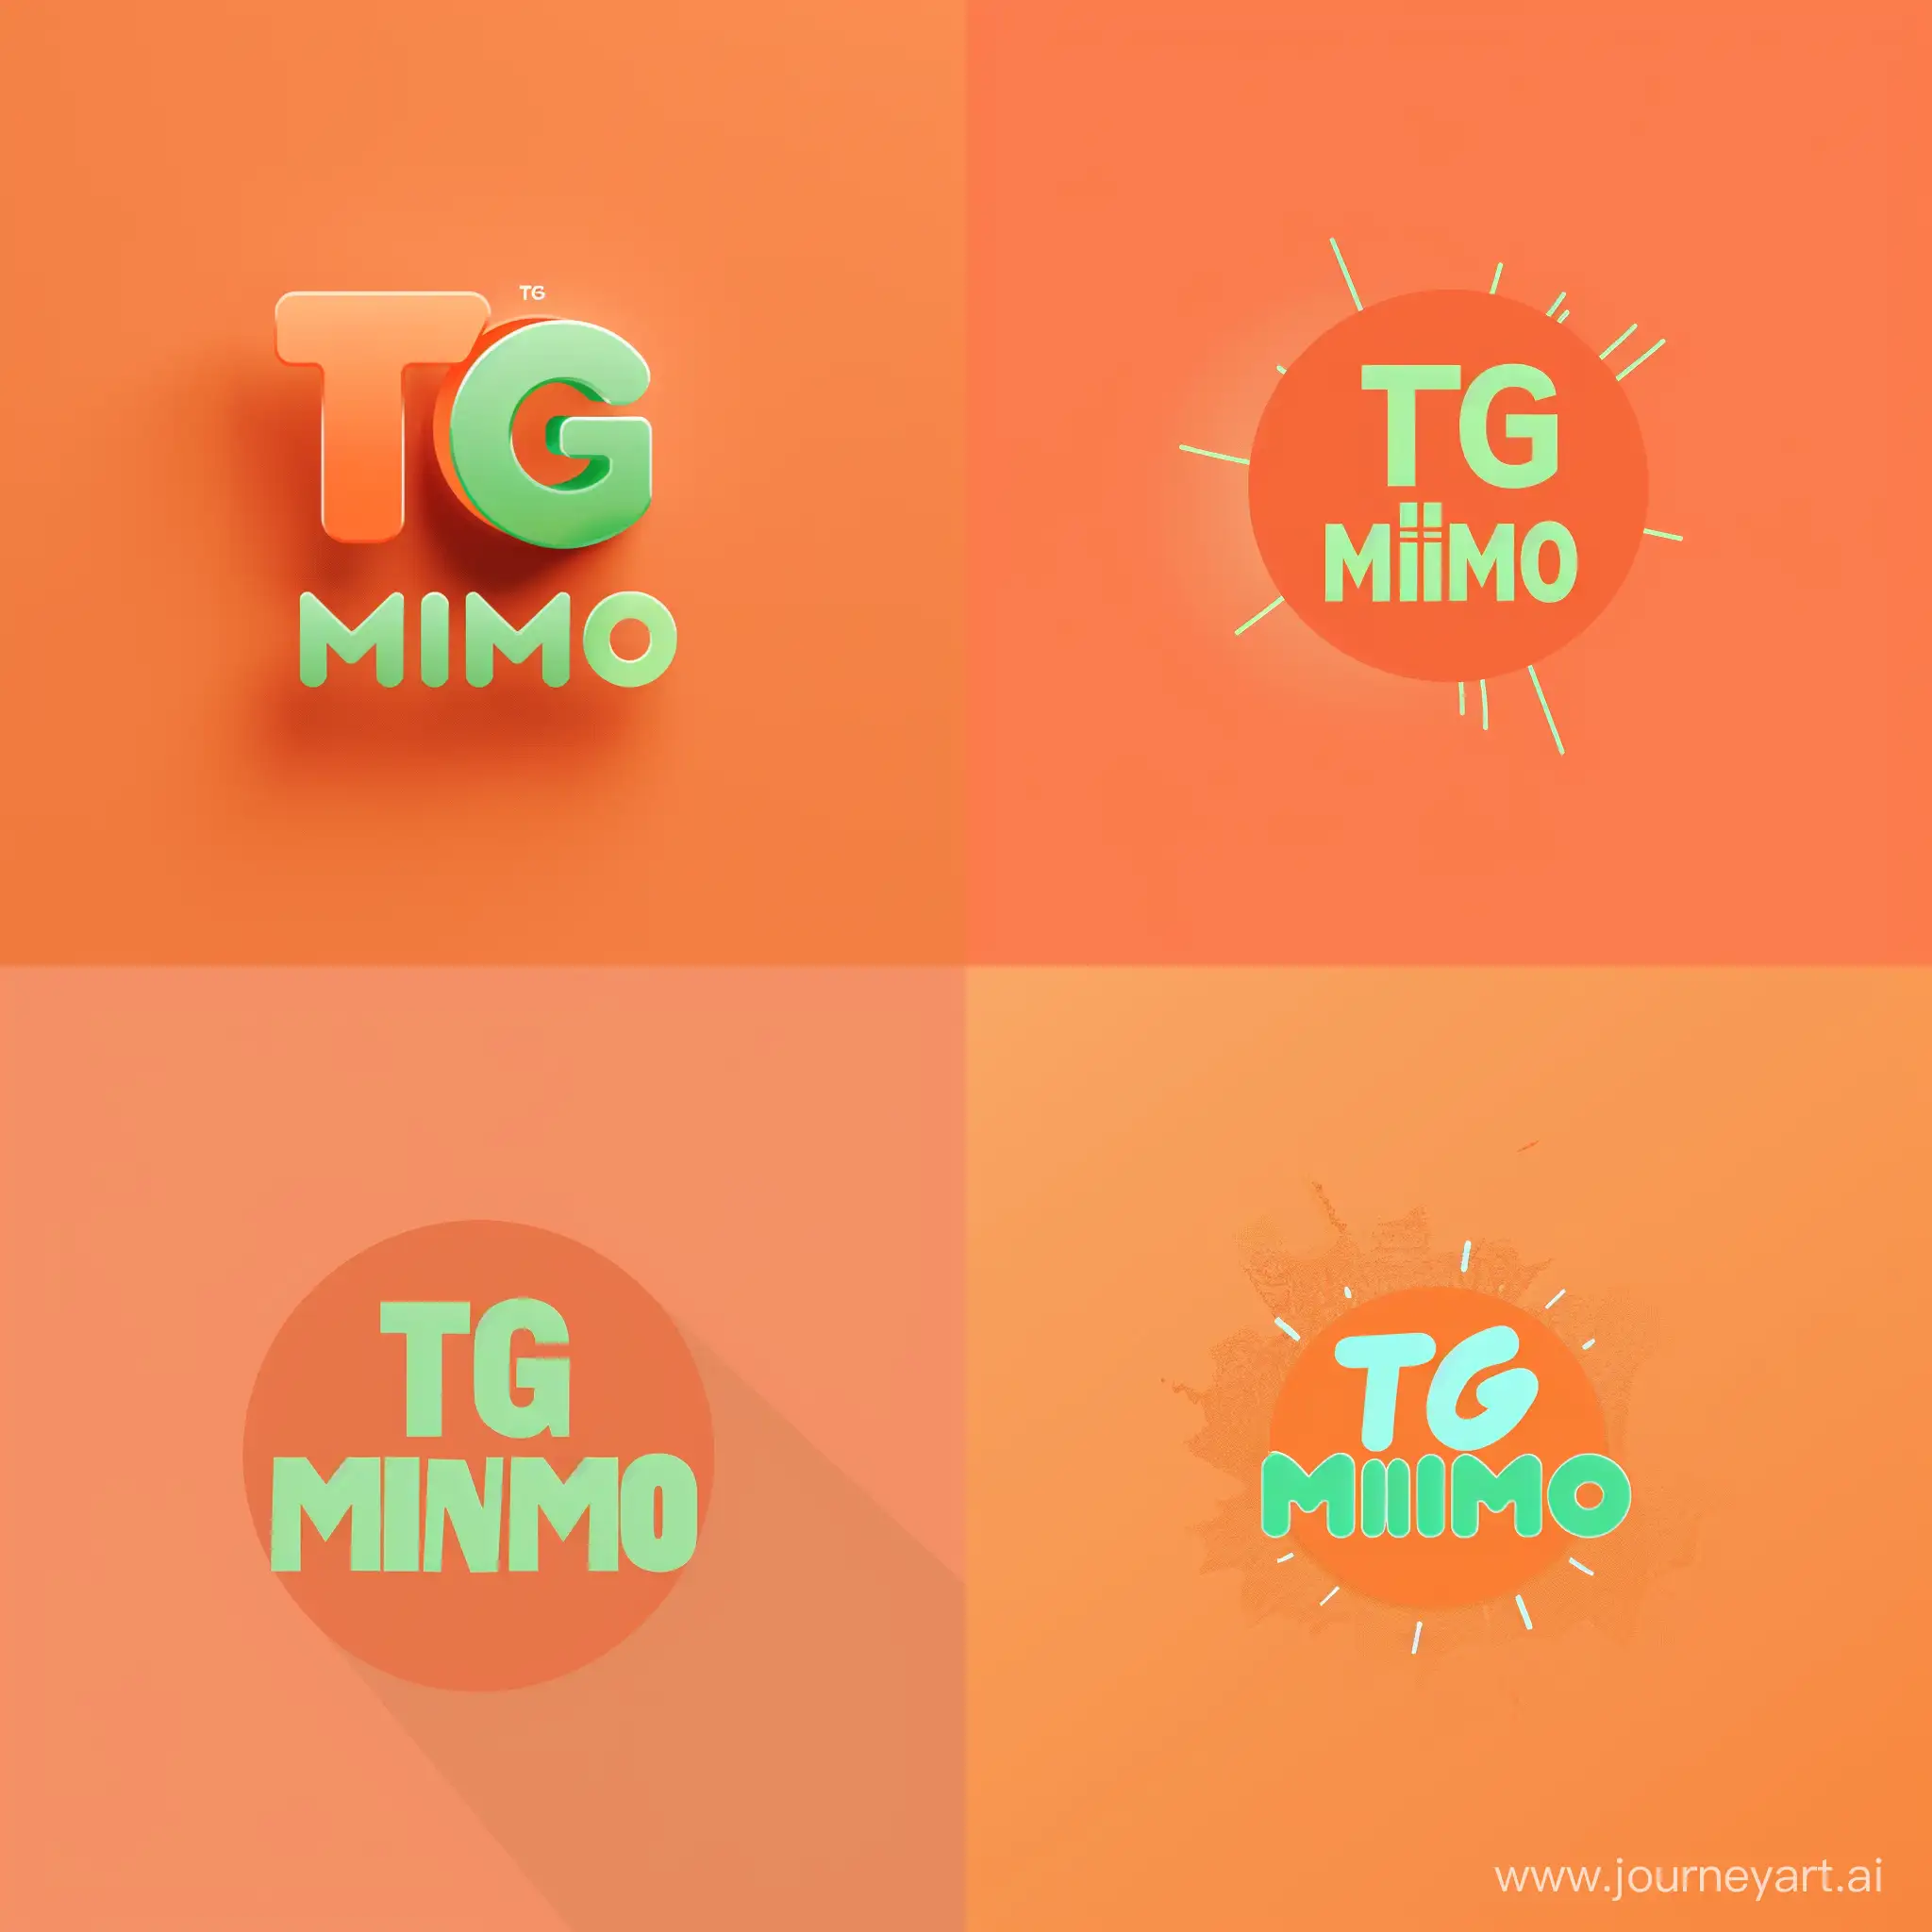 a bright orange all news logo with "TG Minimo" written in light green